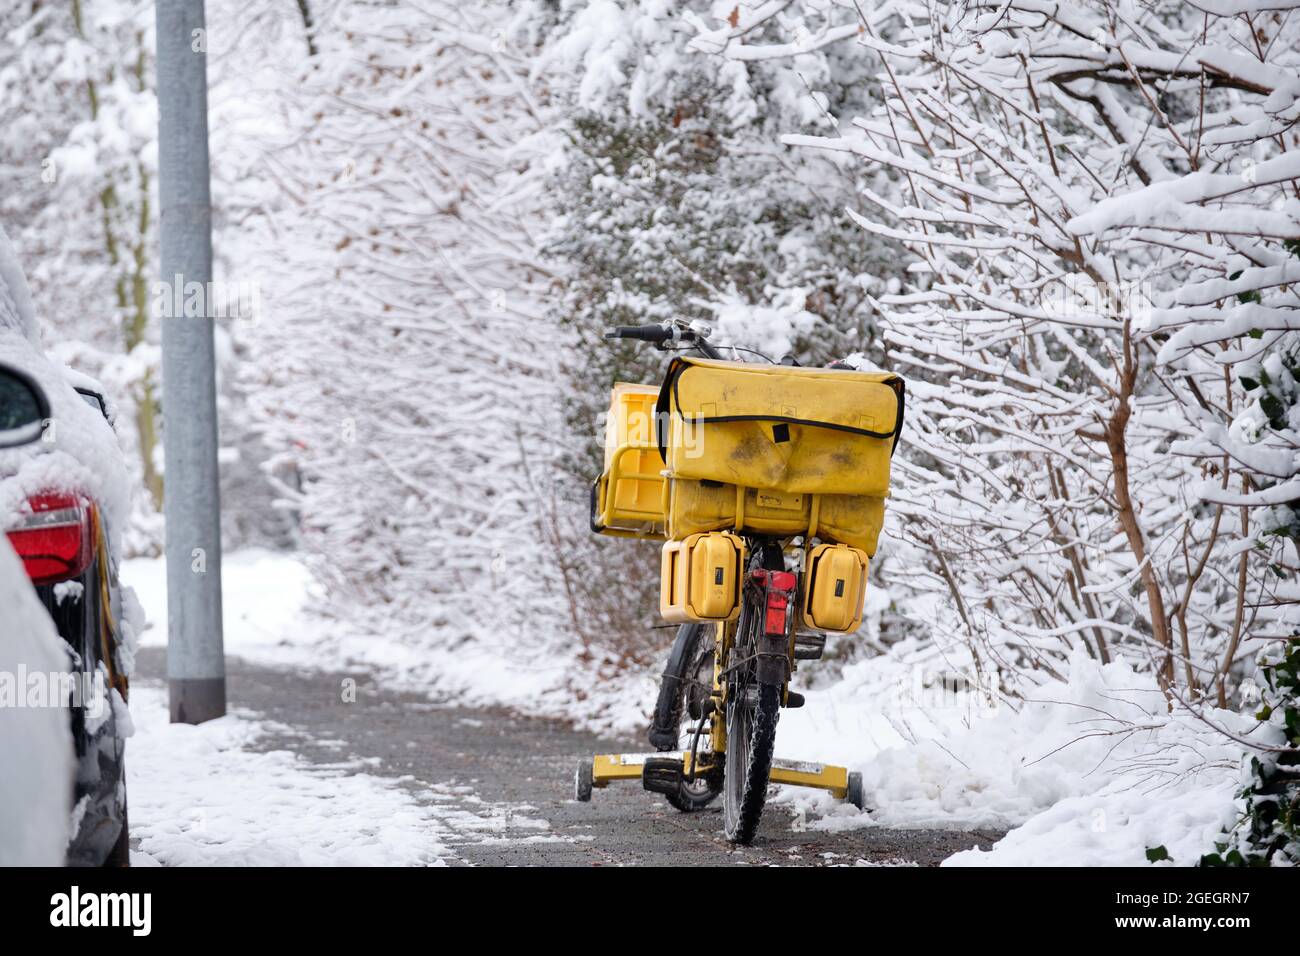 Nuremberg, Germany - February 08, 2021: A postman's yellow bicycle with panniers for the post is standing on a snow covered winter pavement while the Stock Photo